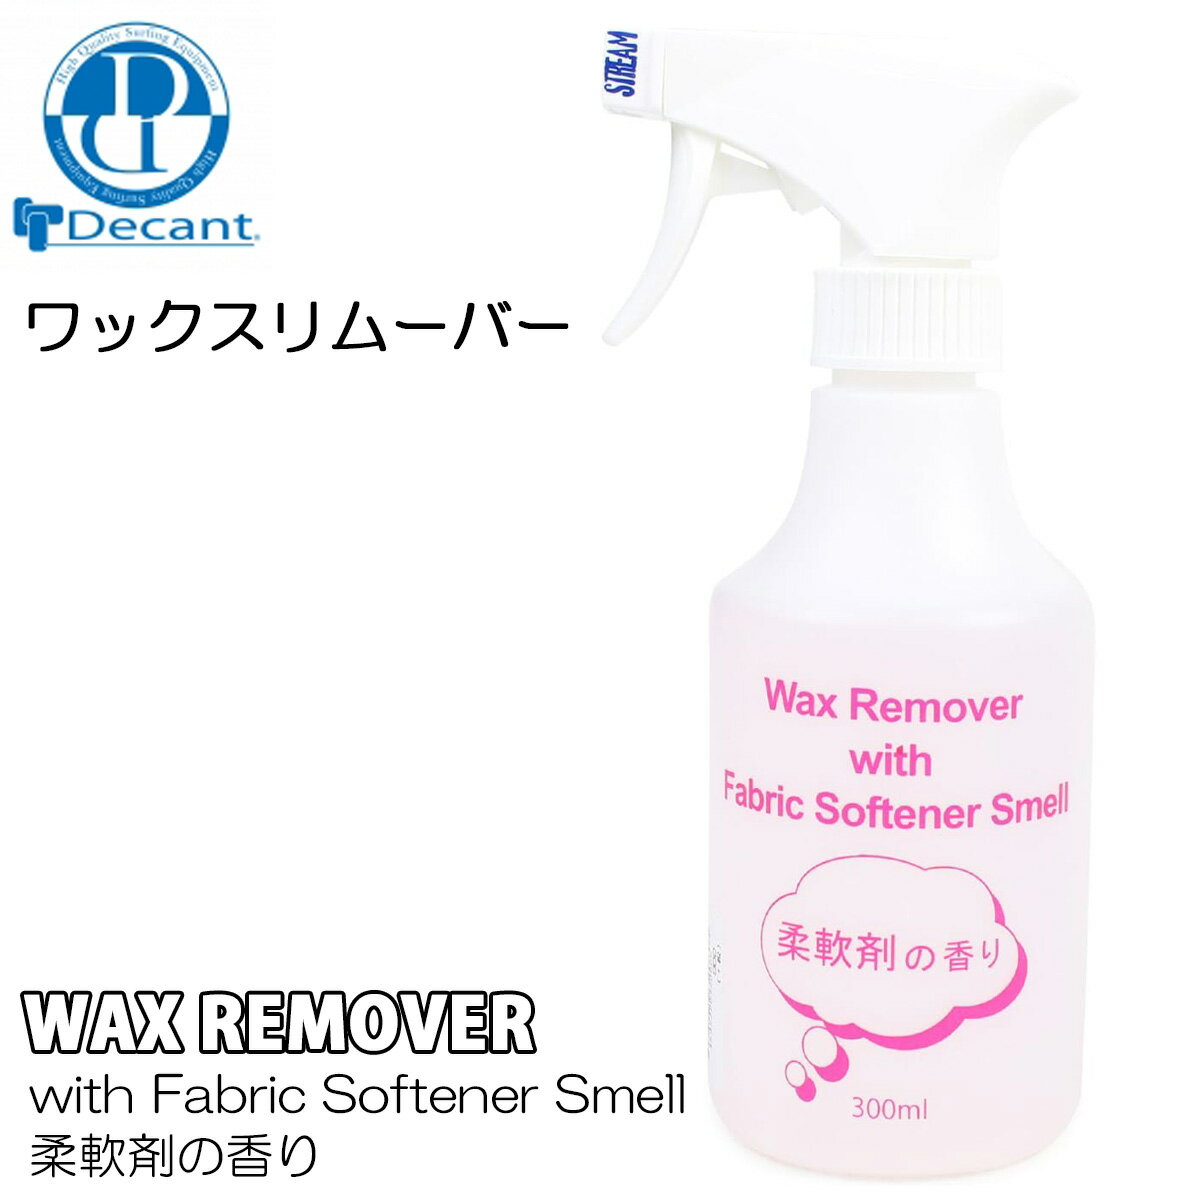 DECANT デキャント ワックスリムーバー WAX REMOVER with Fabric Softener Smell 柔軟剤の香り サーフボード用 WAXリムーバースプレー WAX落とし 汚れ落とし 柔軟材 日本正規品